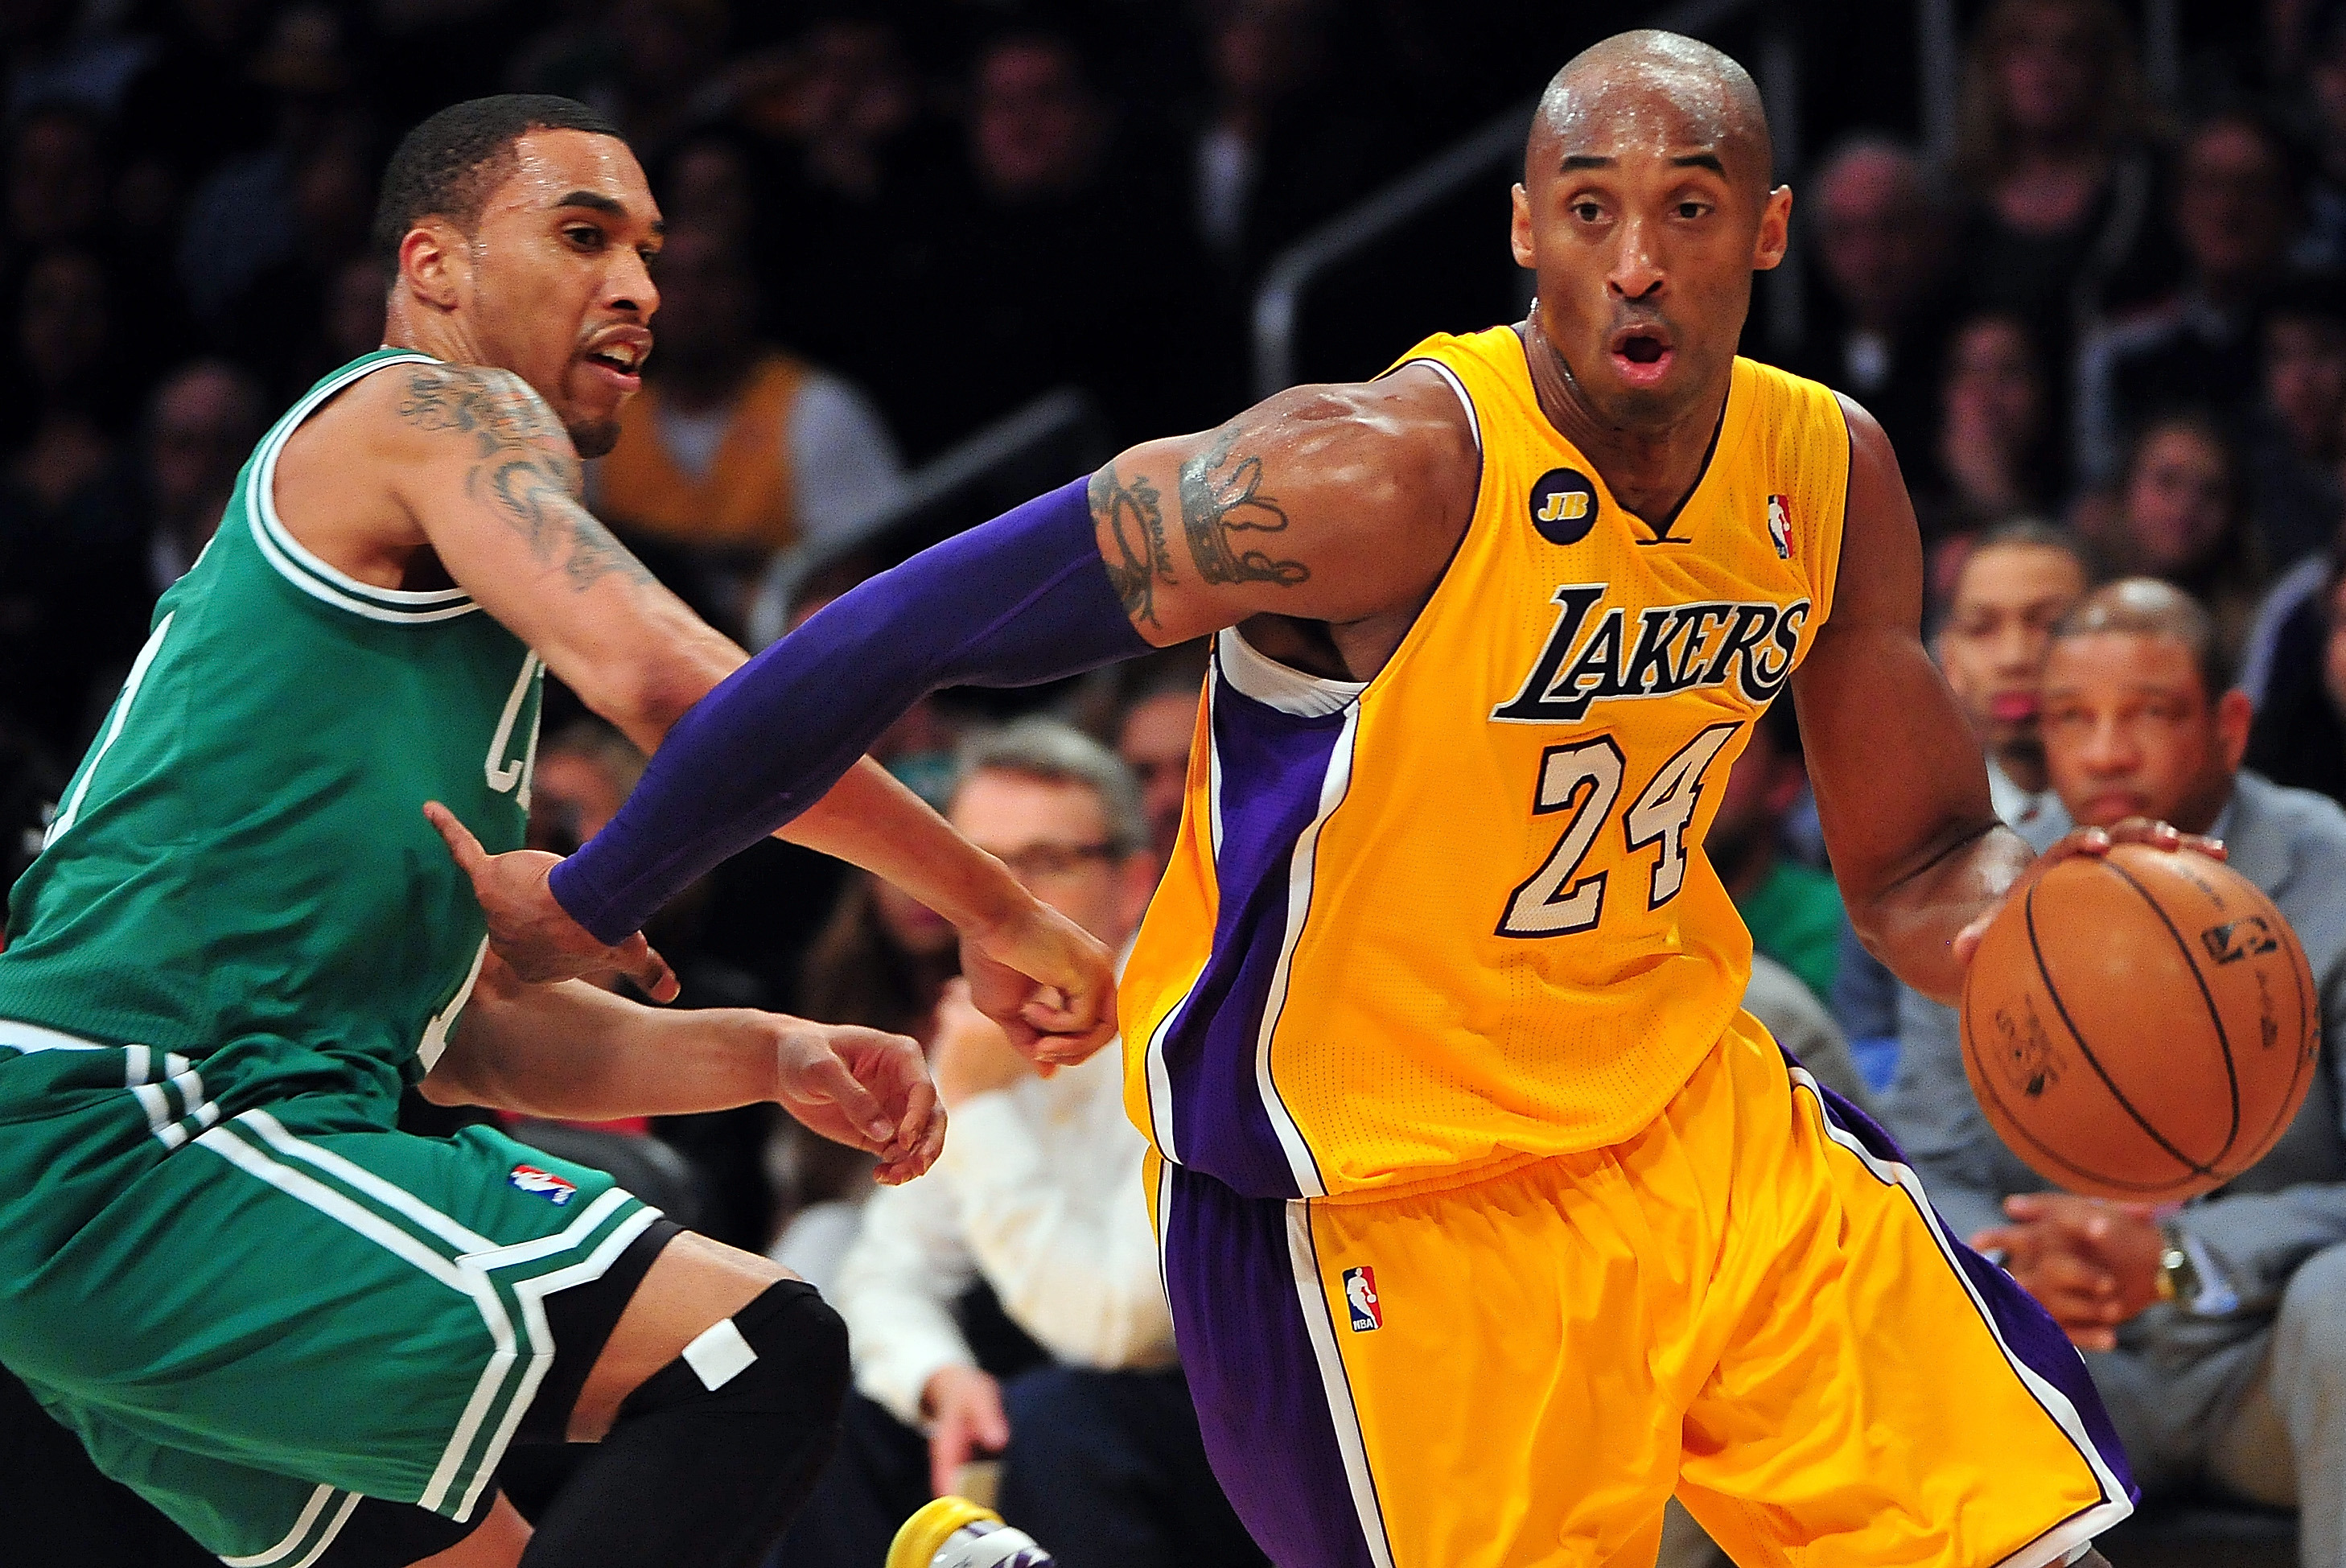 How to Become the Best: 3 Things That Made Kobe Bryant One of the